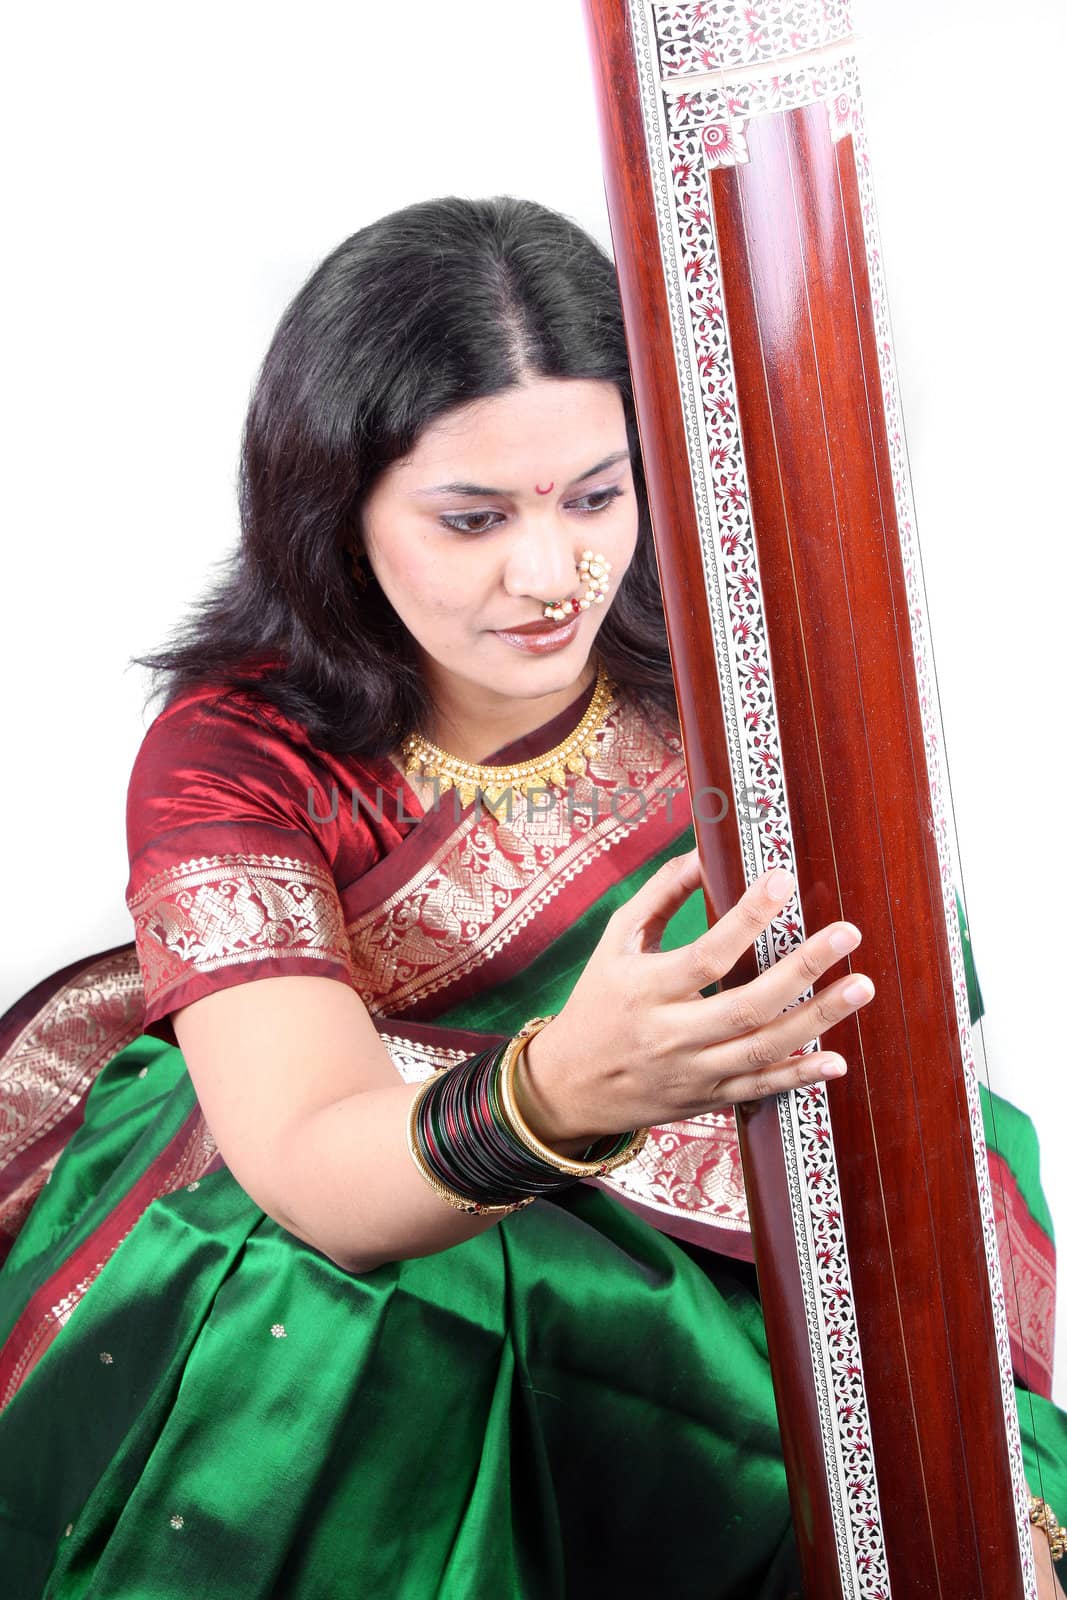 An Indian classical singer with the tanpura instrument, in a traditional attire. (Focus on the hand playing the instrument)